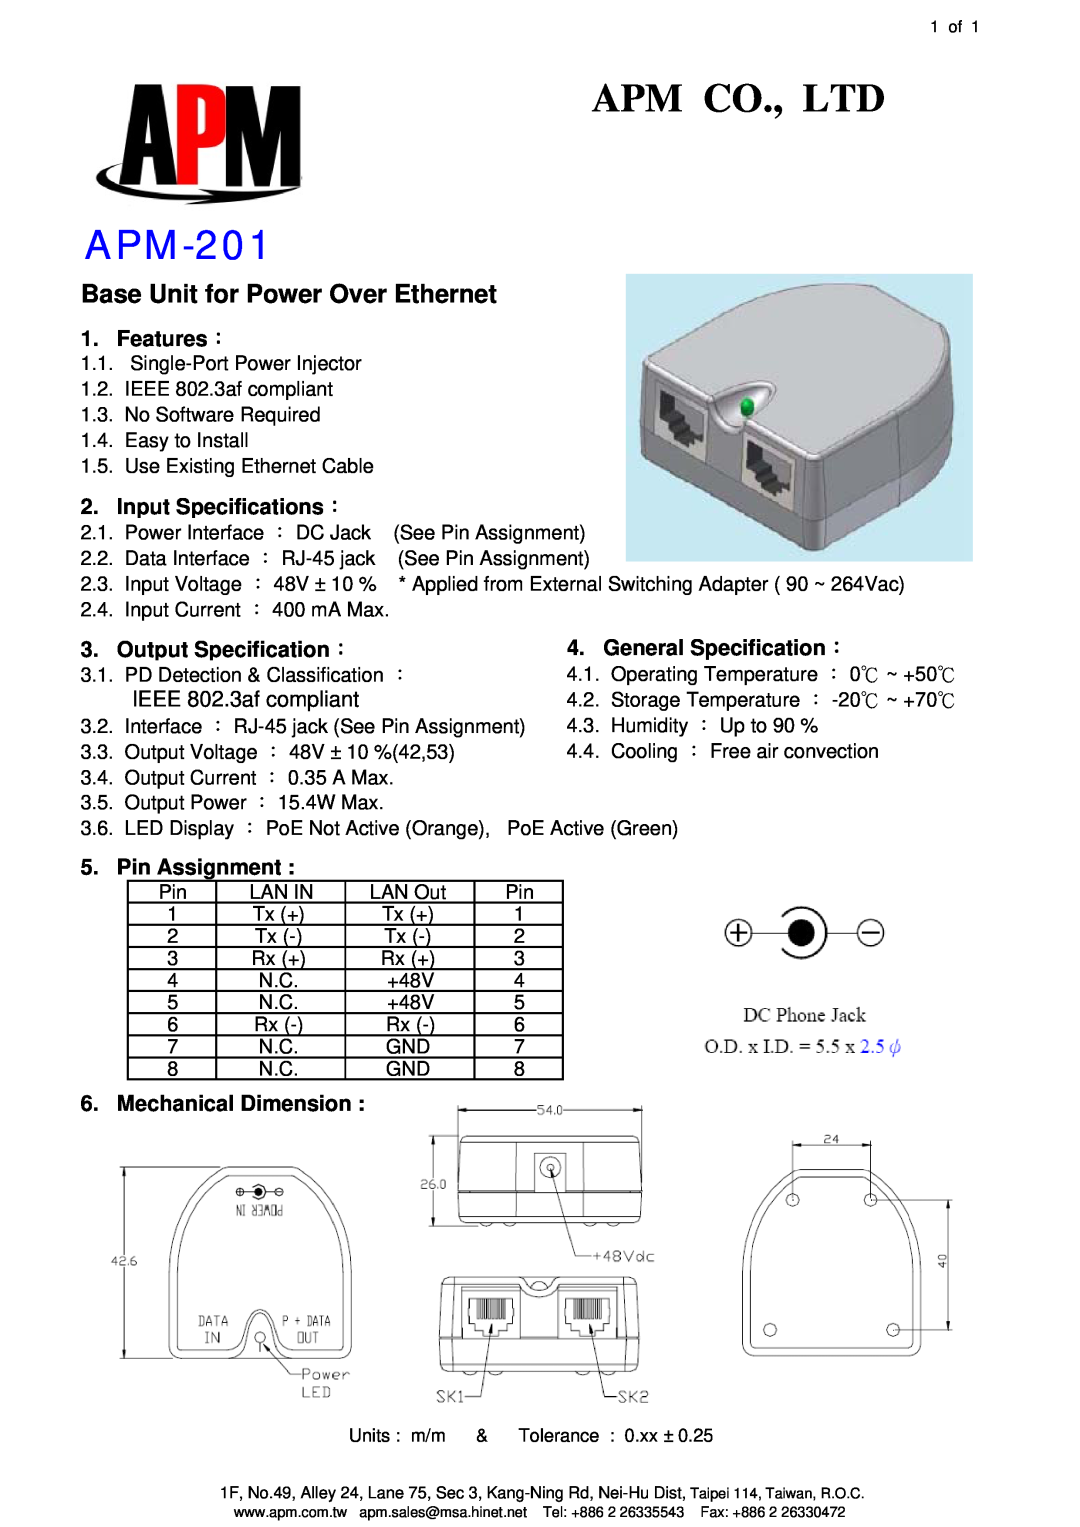 APM specifications APM-201, Base Unit for Power Over Ethernet, Features ：, Input Specifications ：, Pin Assignment 